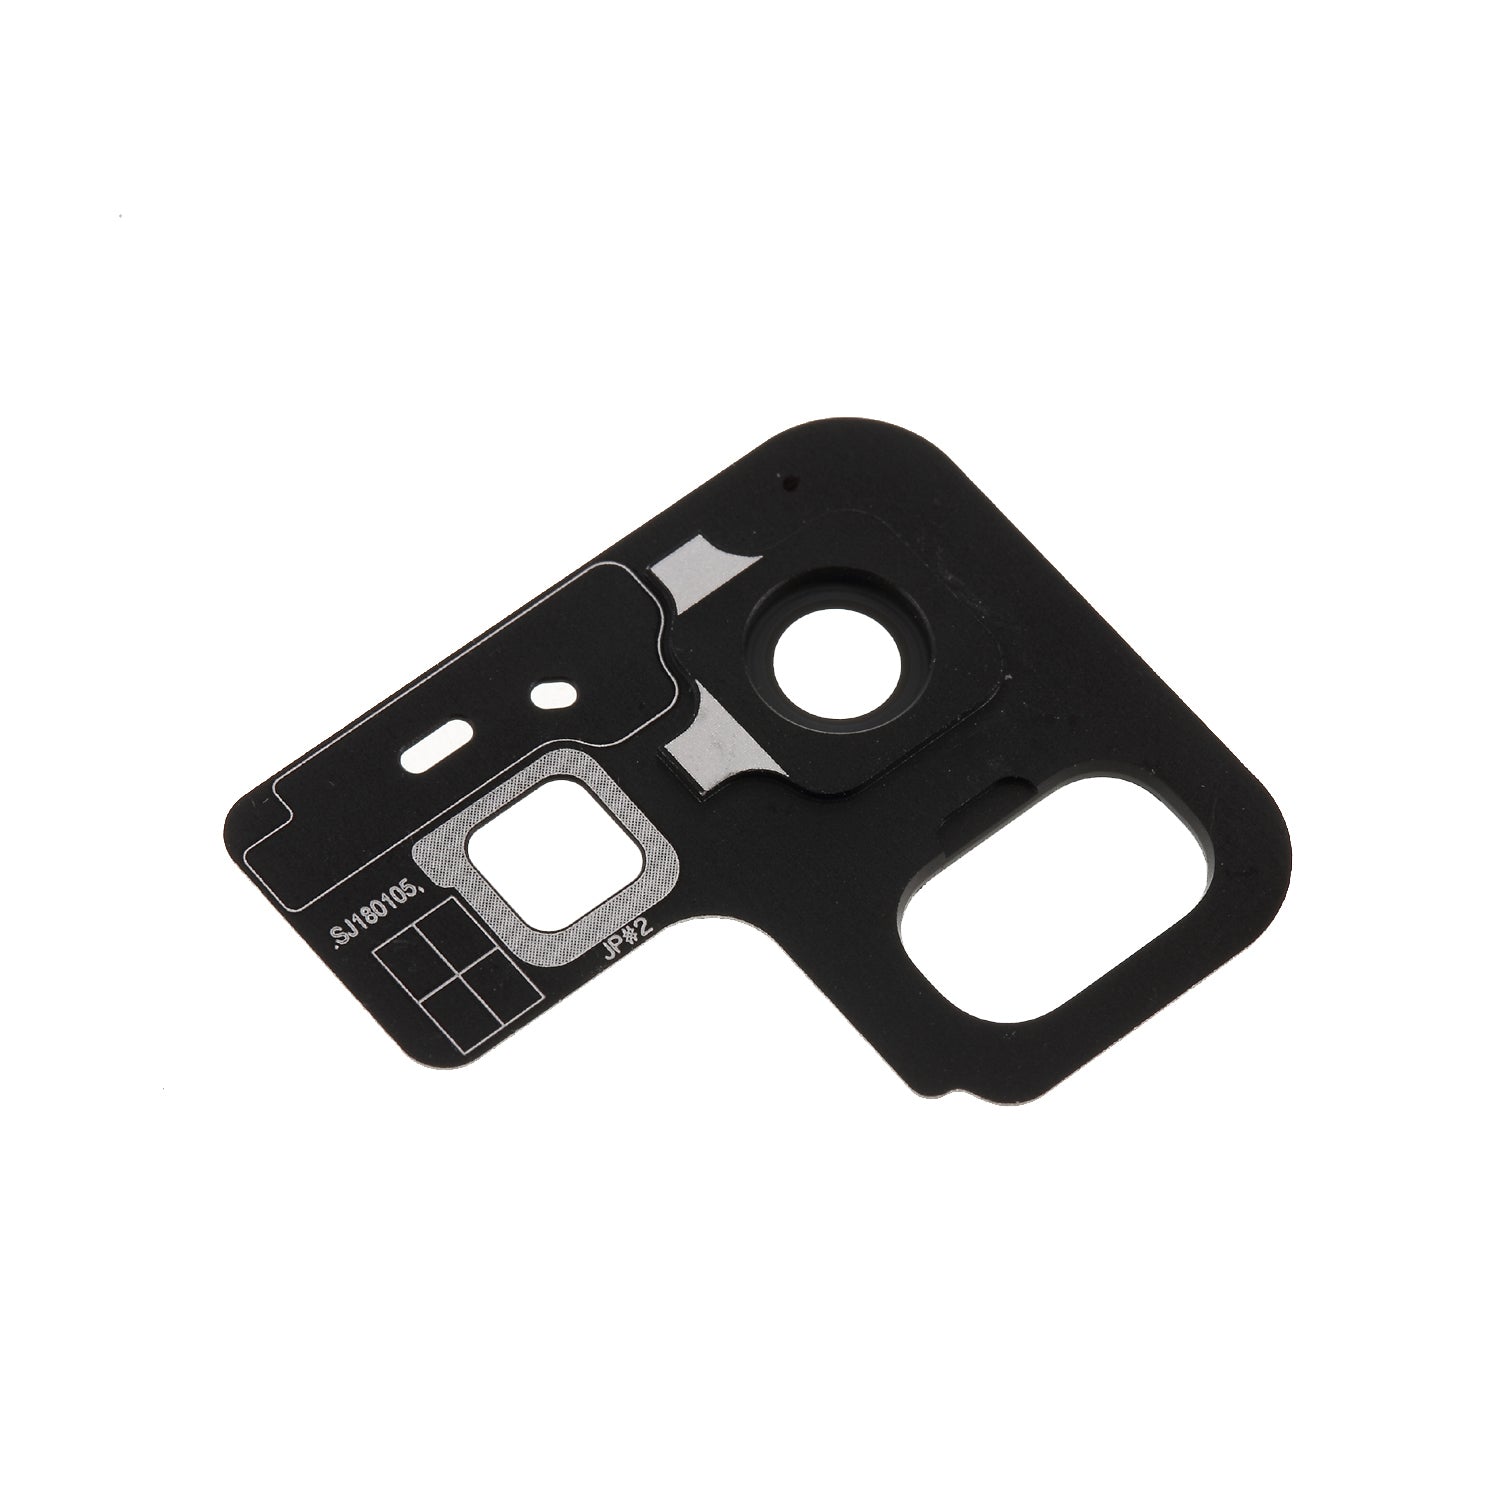 Black - OEM Back Camera Lens Glass Cover Part for Samsung Galaxy A8+ (2018)/A8 (2018) A530